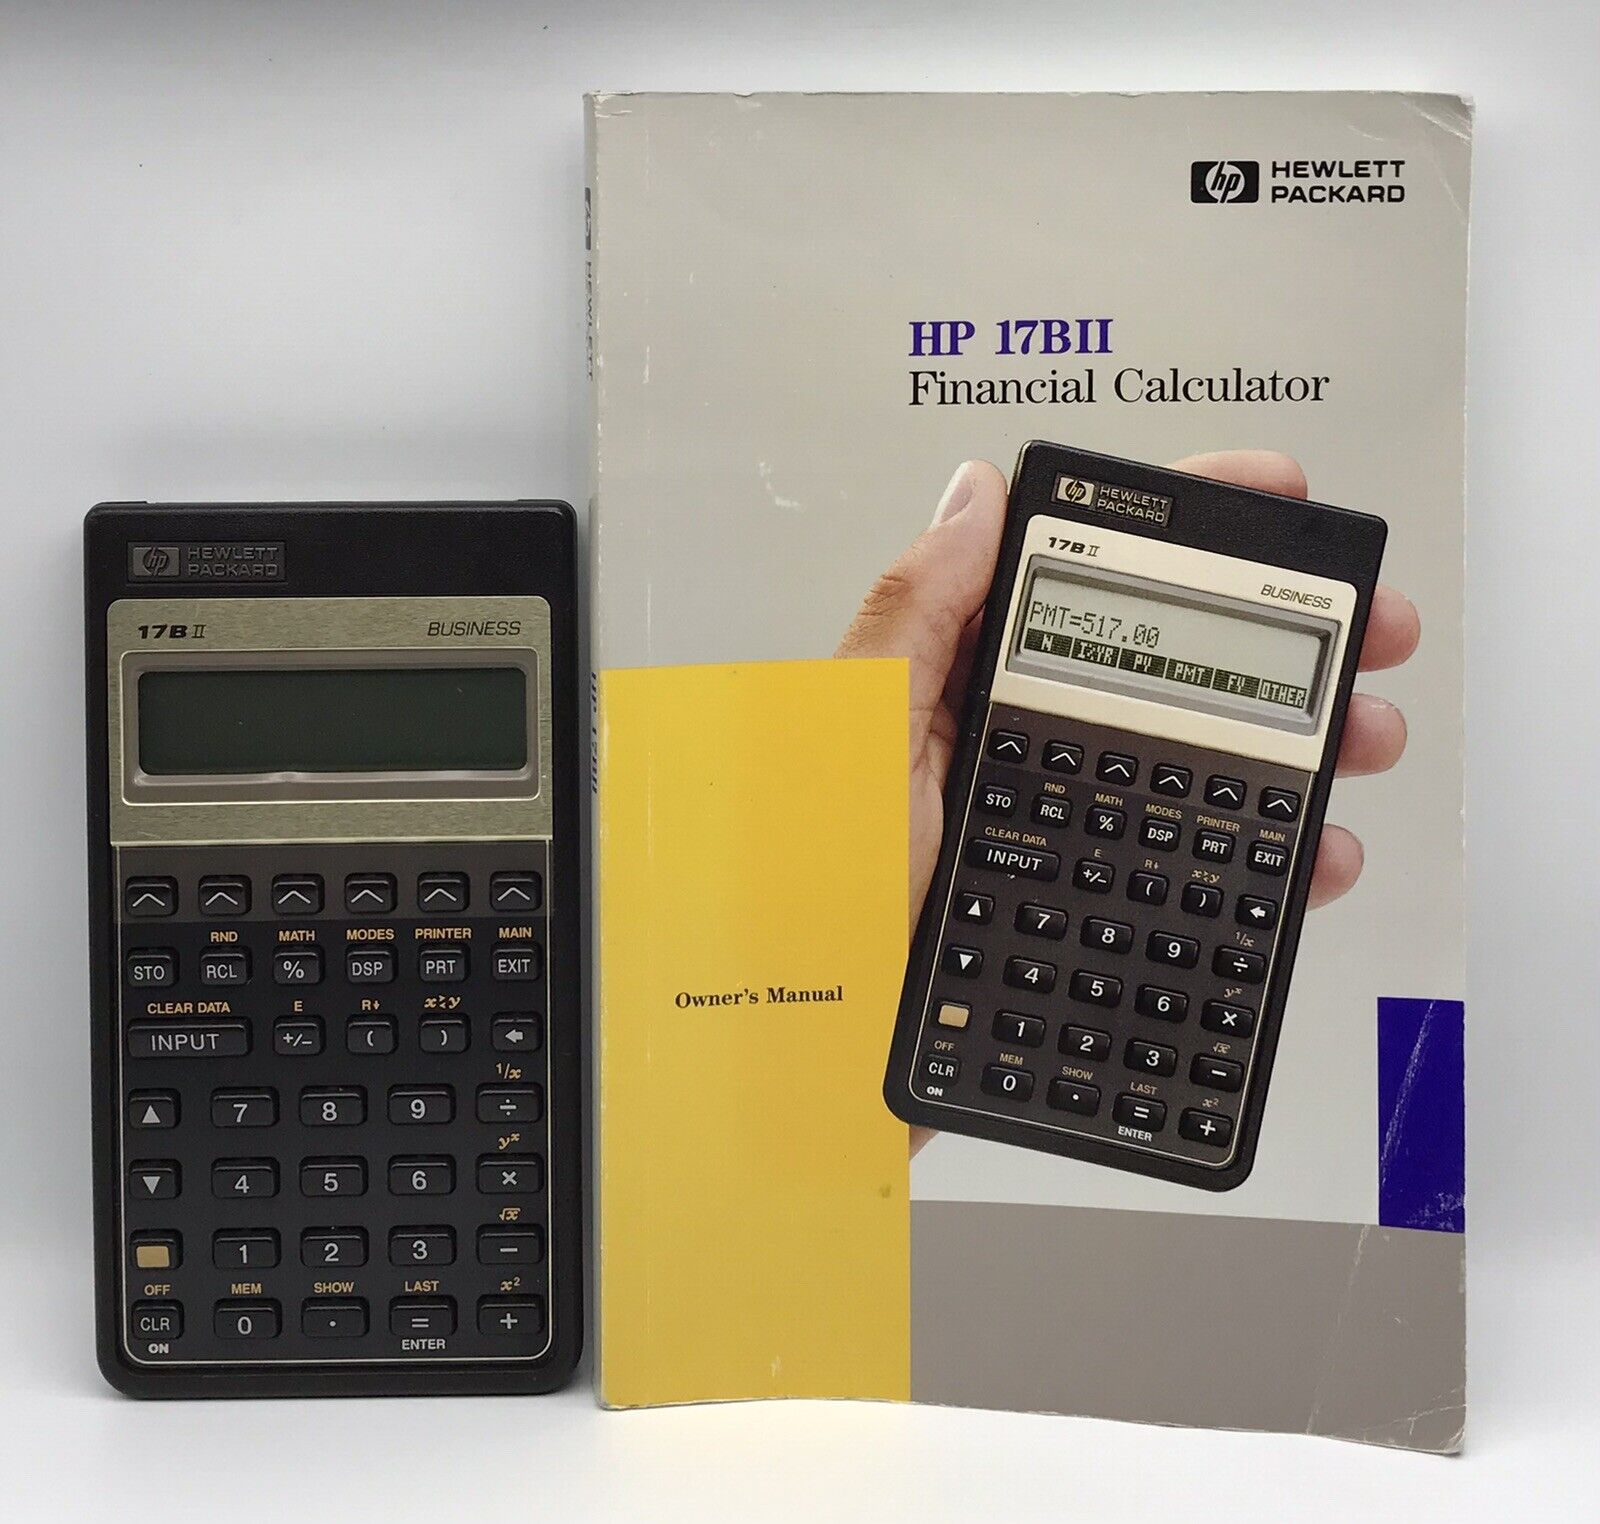 Vintage HP-17BII Business Financial Calculator With Case and Manual - TESTED